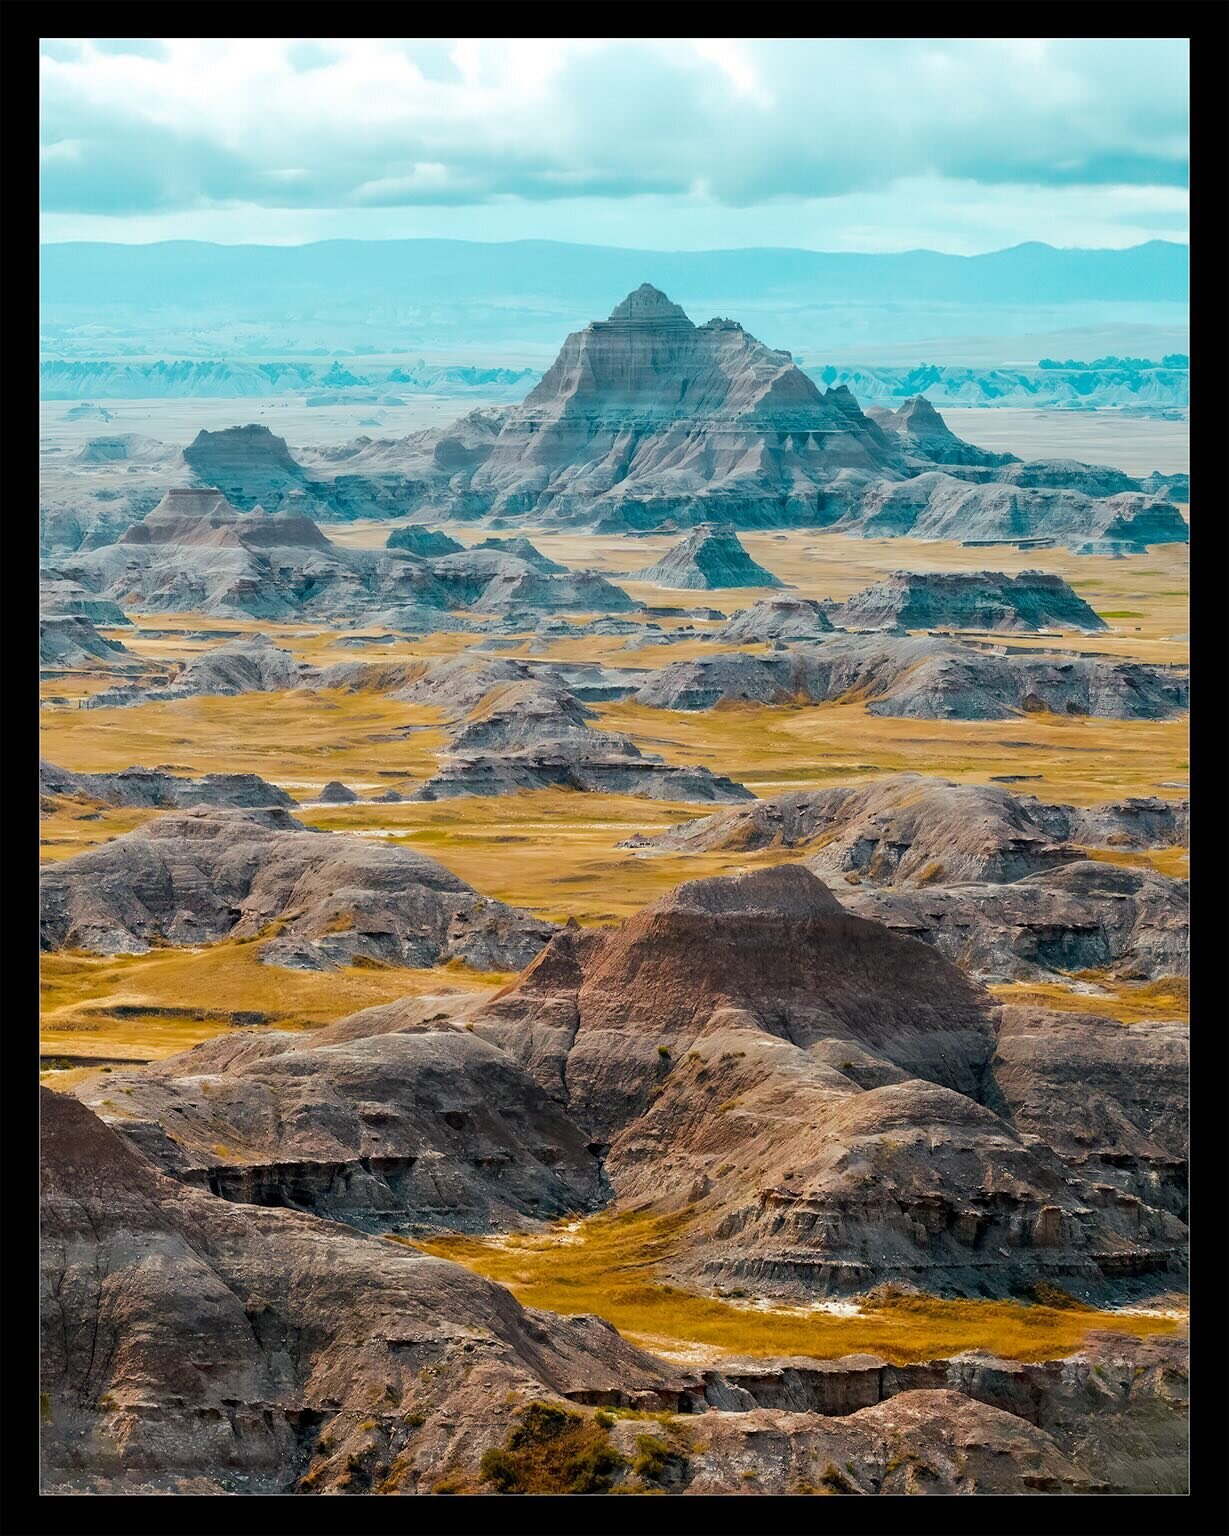 ⏮️ SWIPE SERIES ⏯️

Badlands National Park, located in South Dakota, is a mesmerizing landscape defined by its rugged terrain, towering spires, and colorful layered rock formations. The park spans over 240,000 acres, offering visitors opportunities f